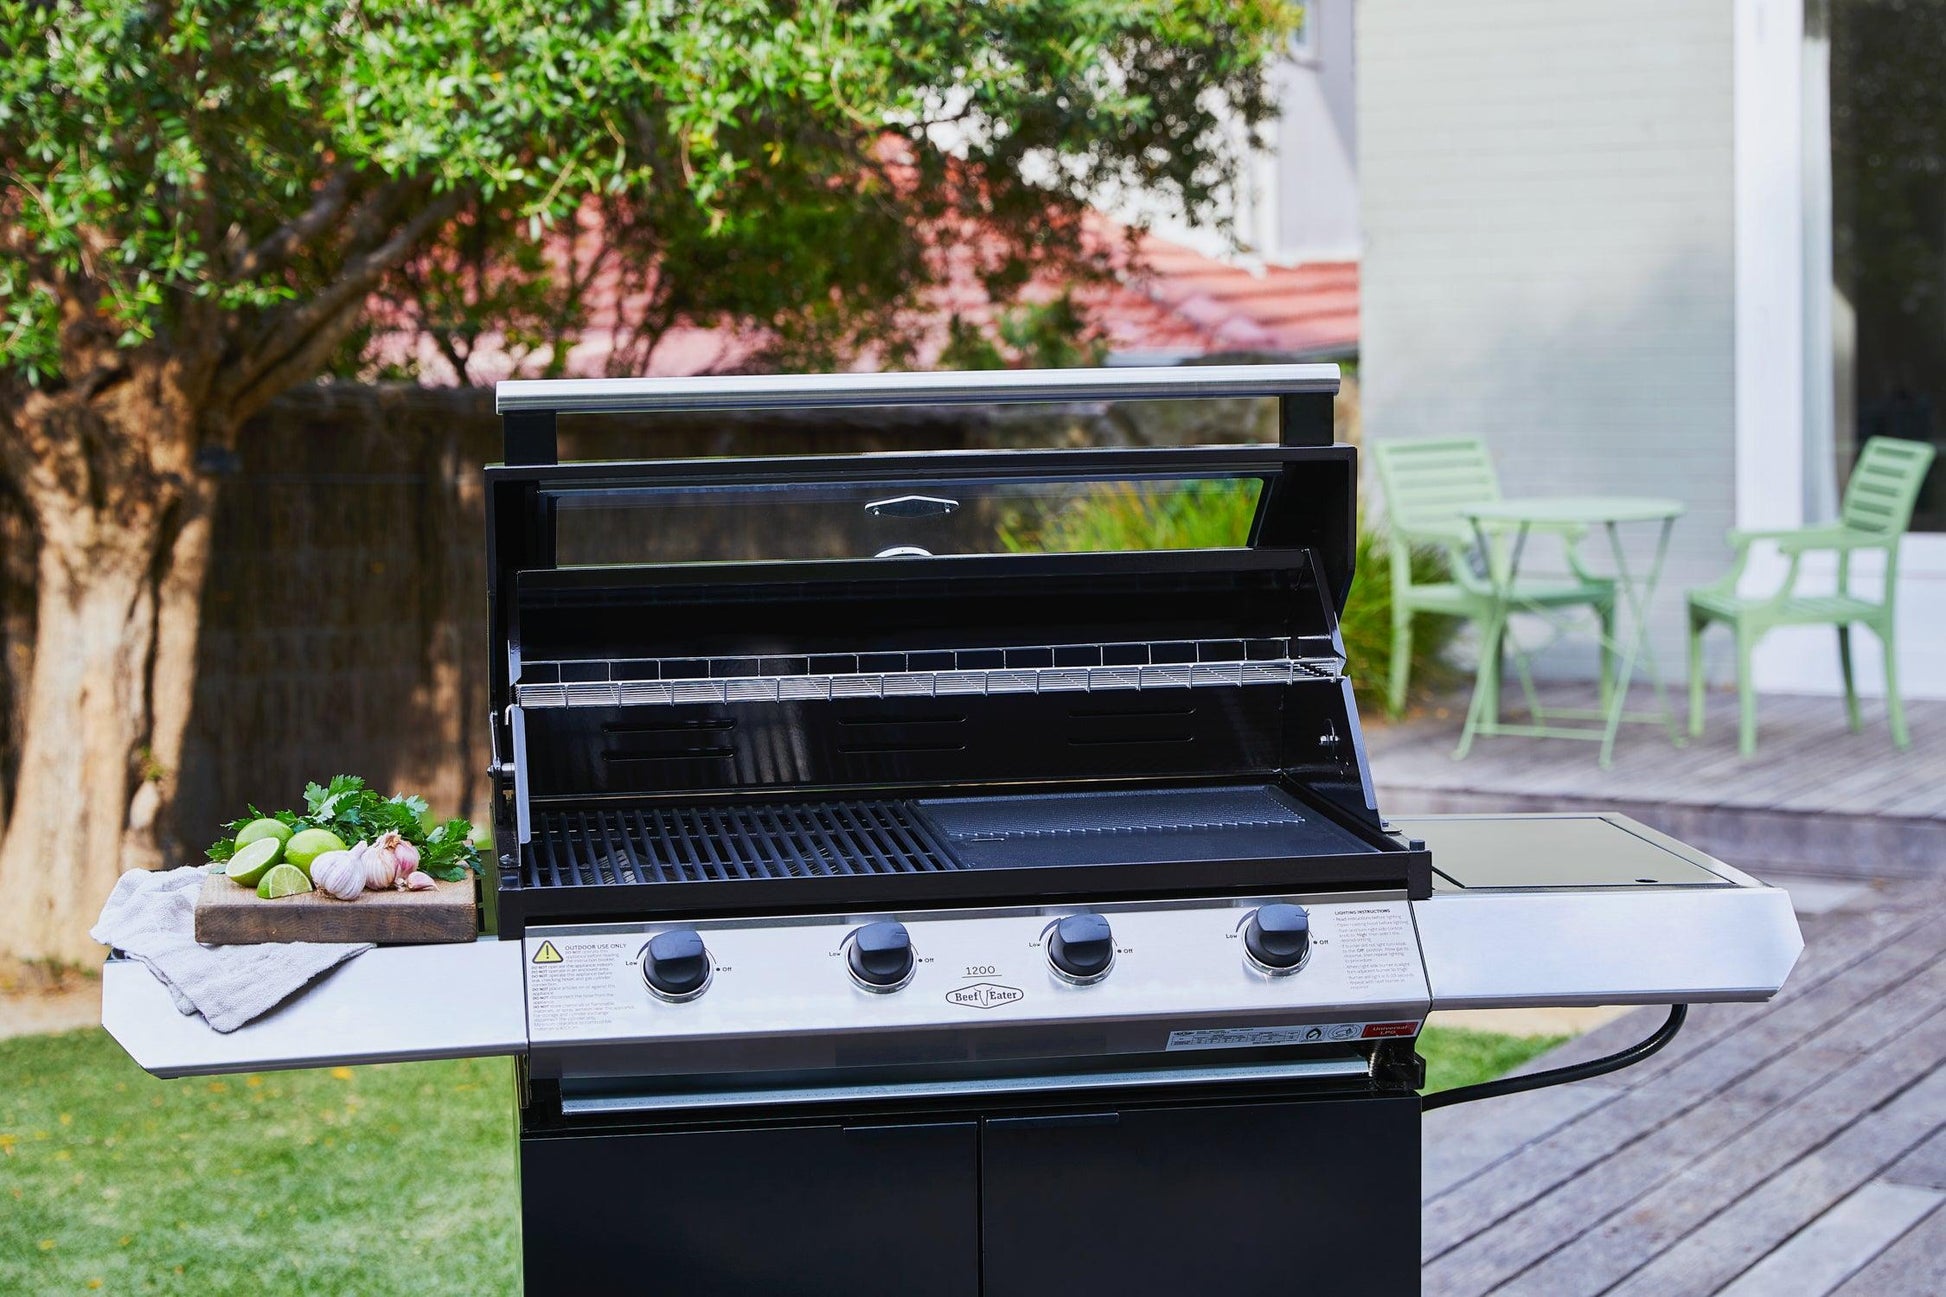 A Brisks BeefEater 1200E Series 4 Burner BBQ & Trolley stands proudly on a patio in a backyard with a tree and green chairs in the background. The grill has its lid open, revealing its potential for an outdoor kitchen, and a tray with vegetables and herbs is placed on its left side.